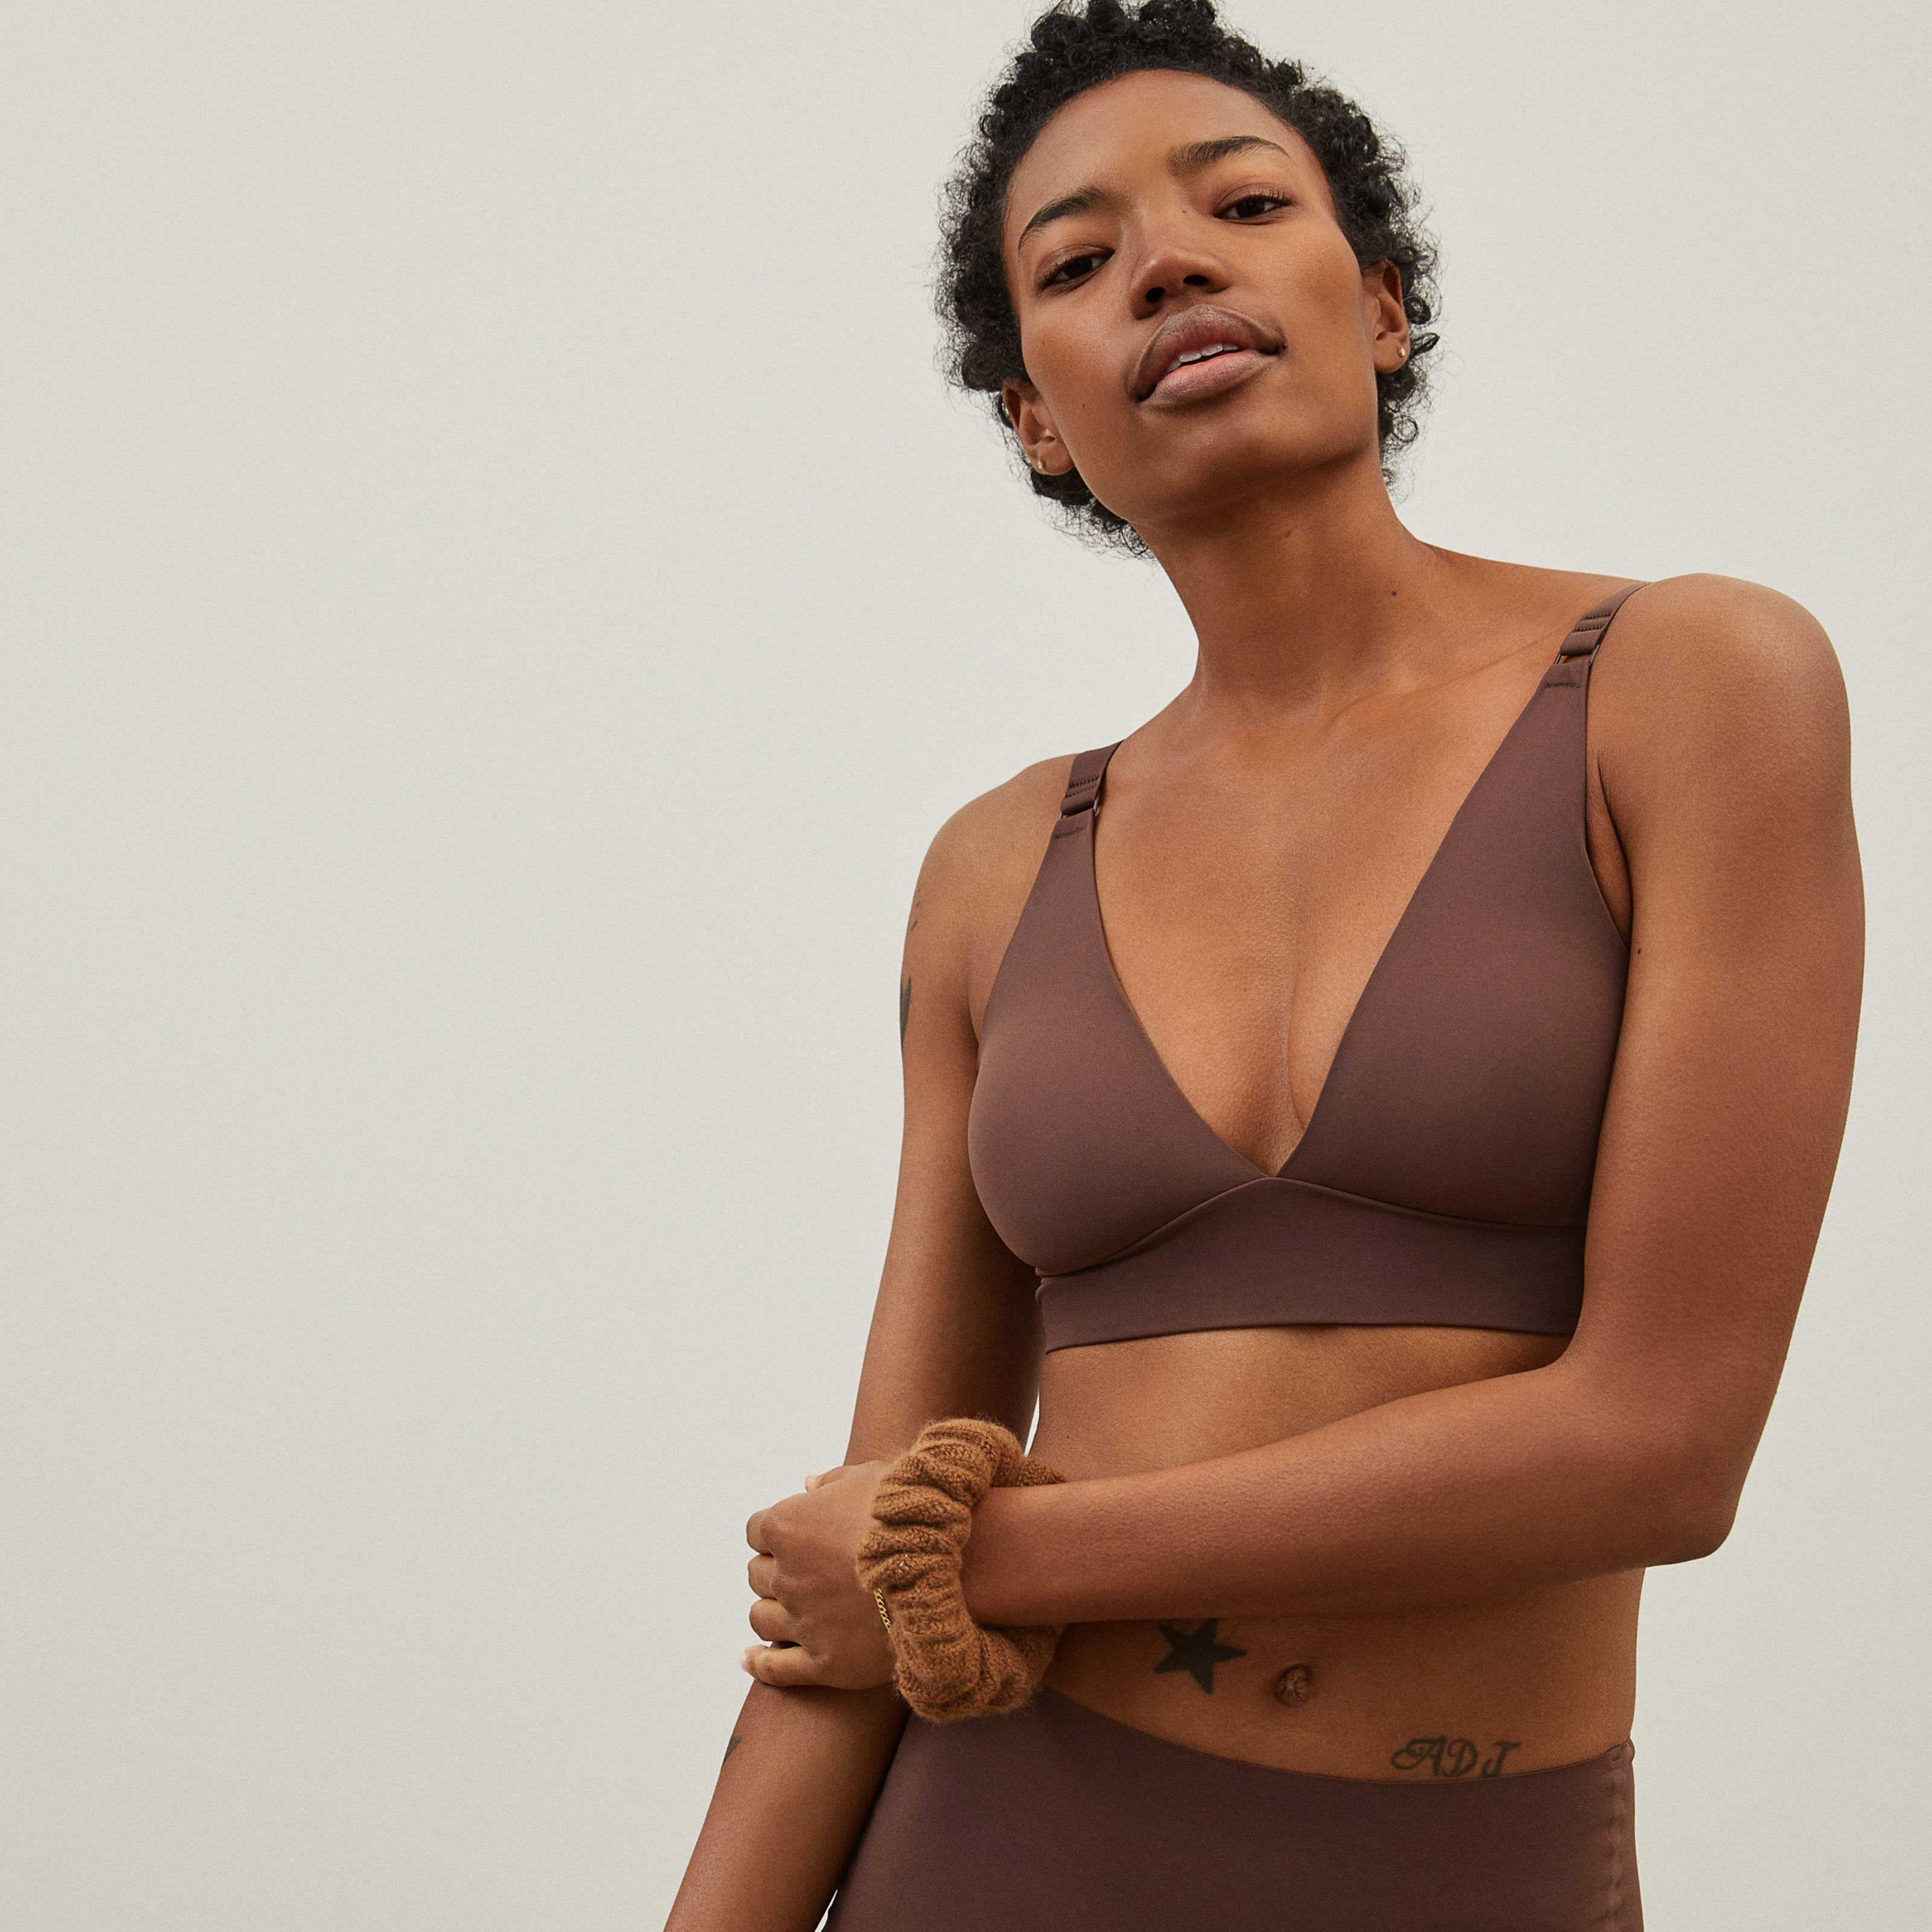 I'm Flat Chested, here's the 27 Best Lingerie For Small Busts – topsfordays